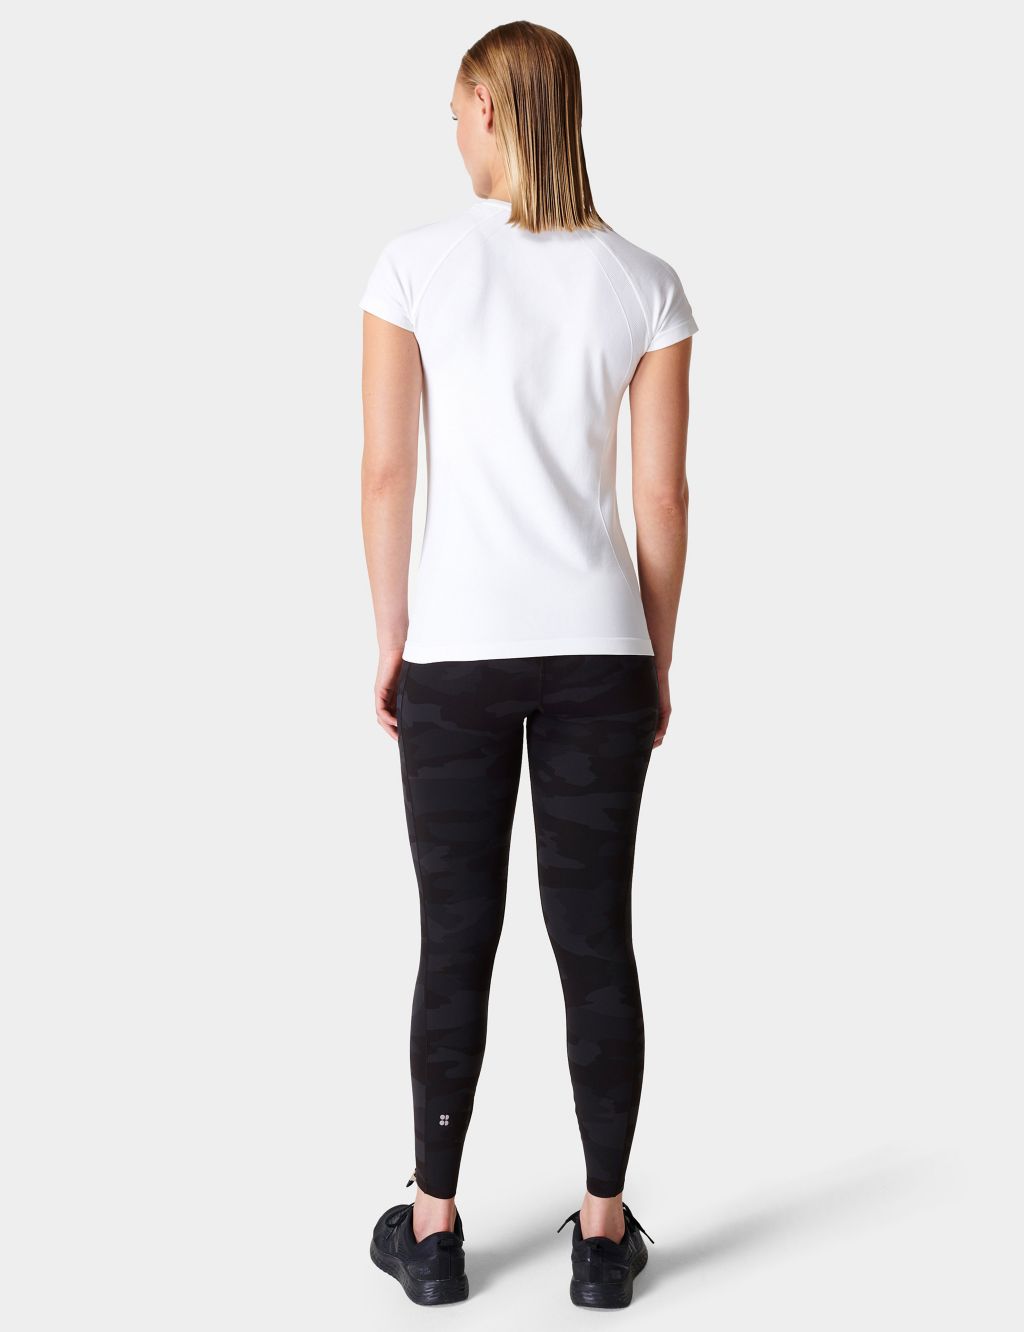 Athlete Seamless Fitted T-Shirt image 4